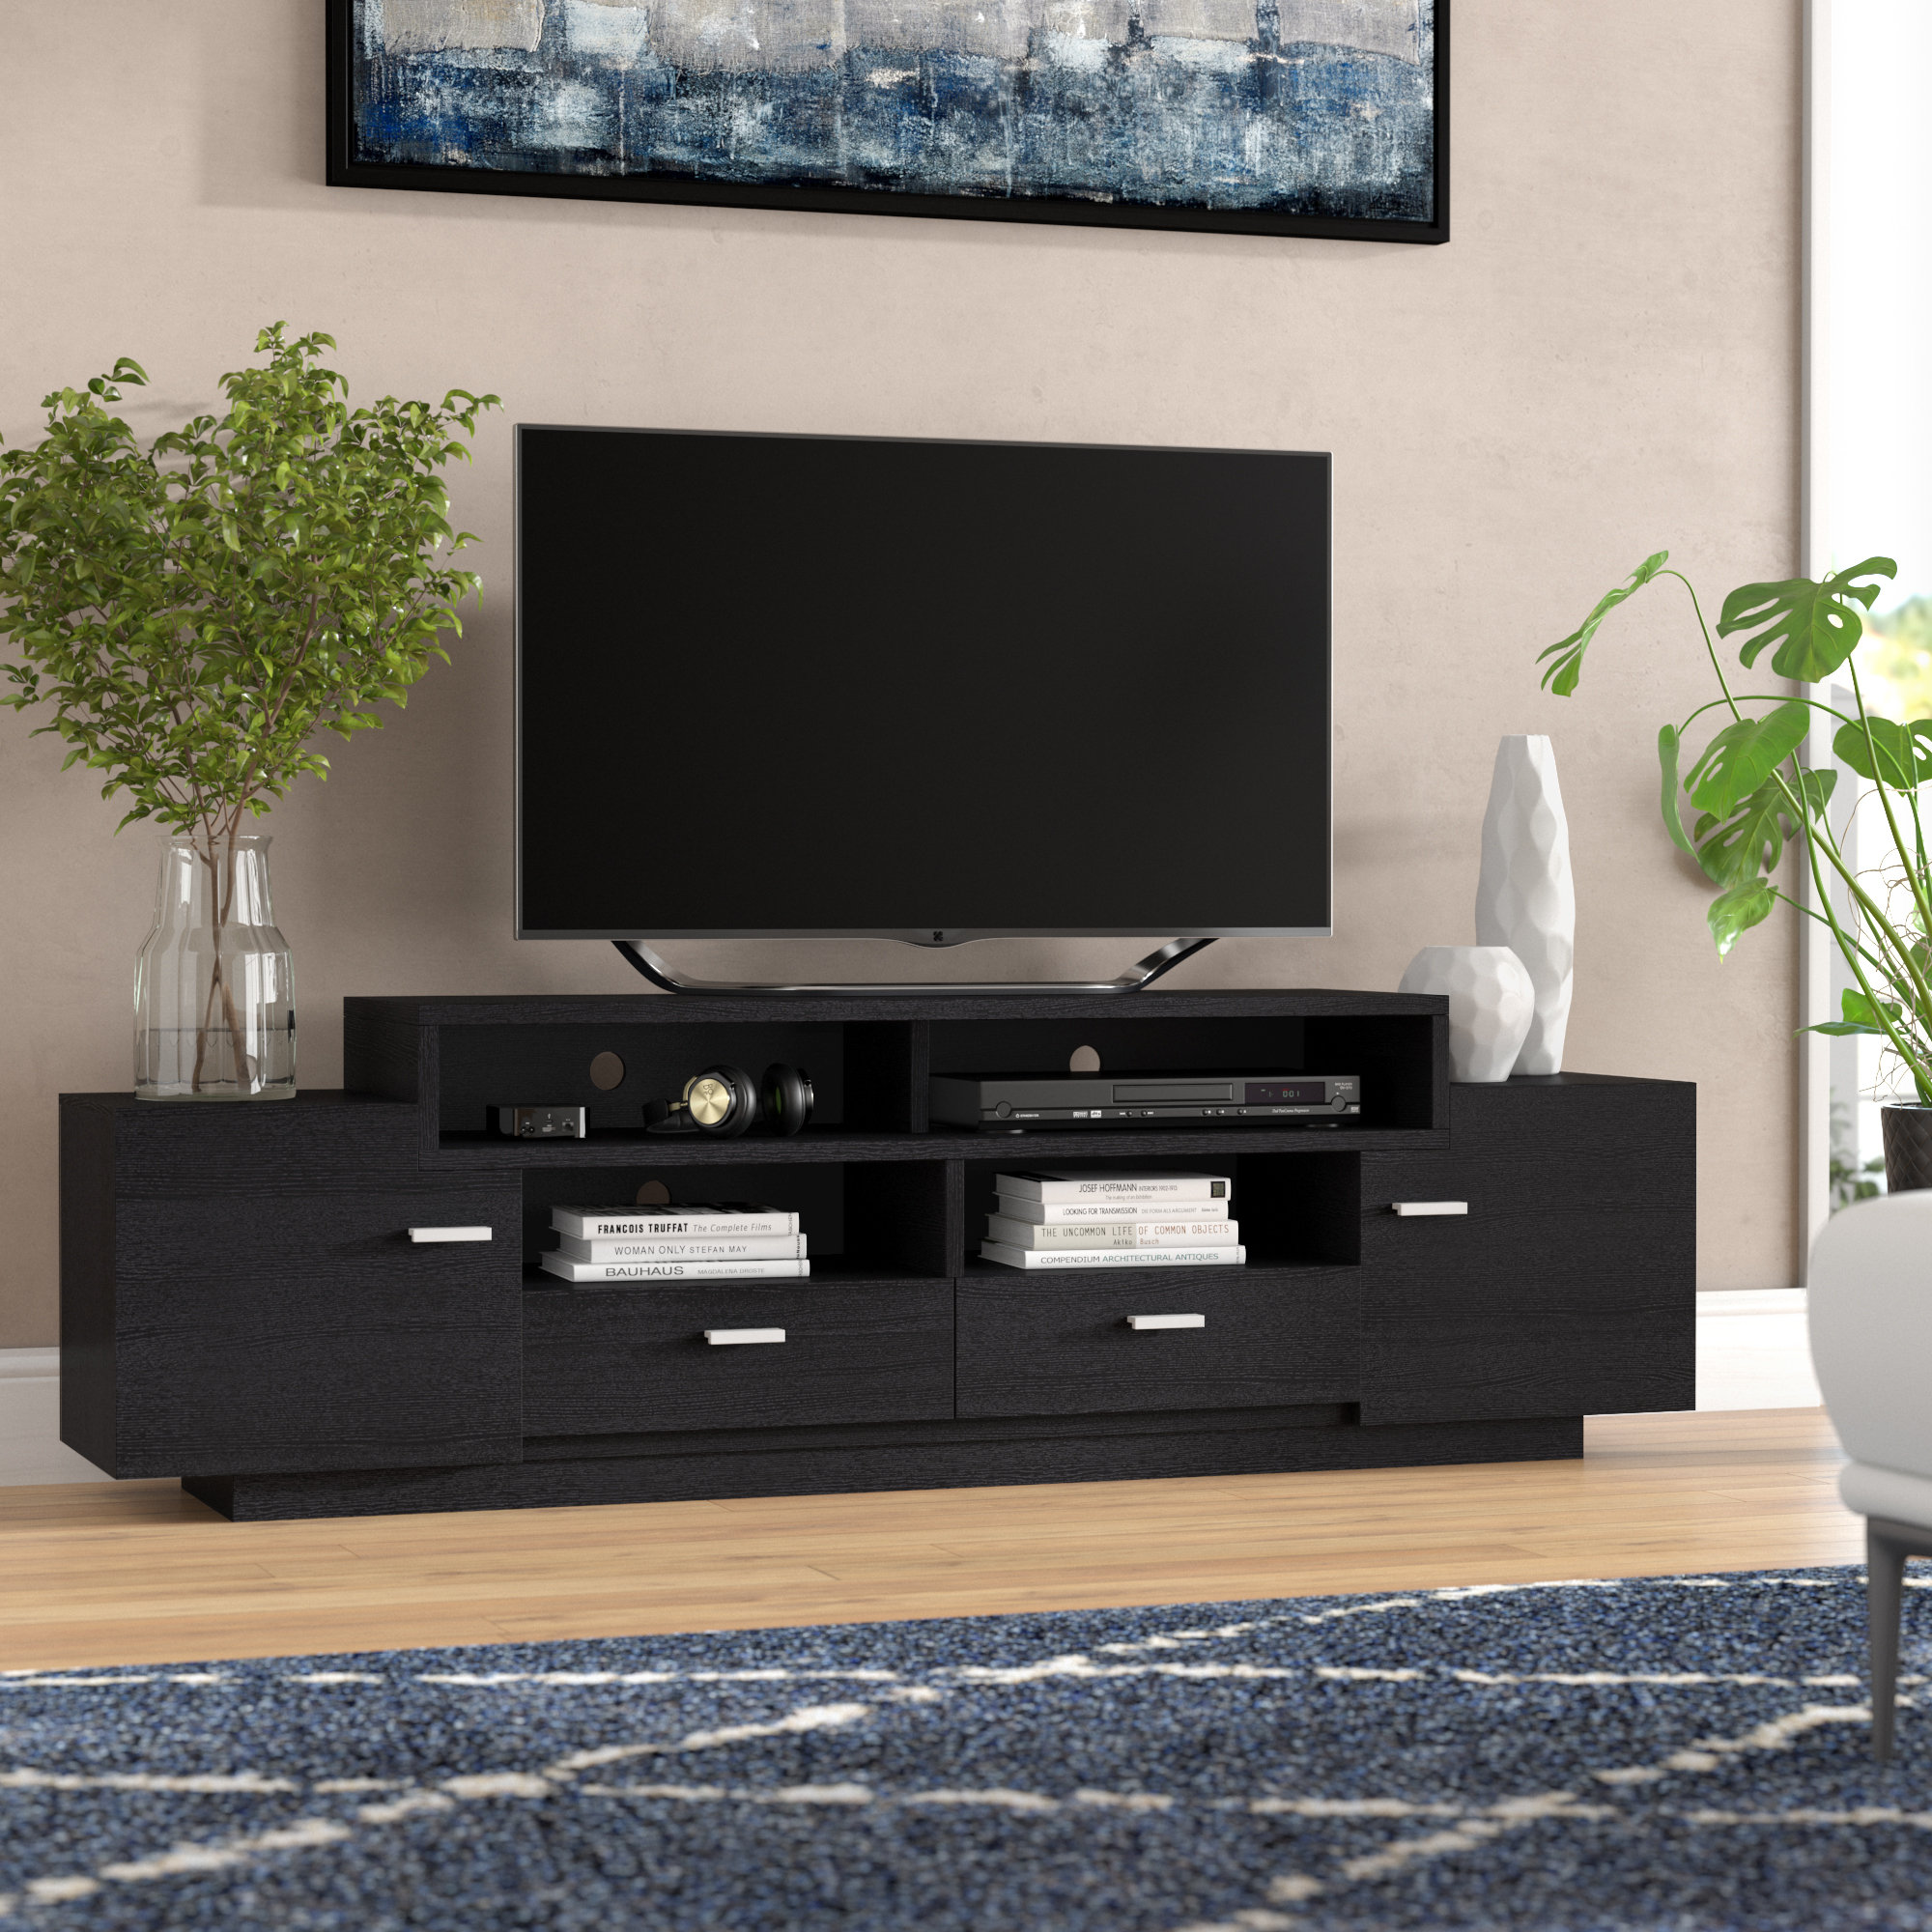 Amazon Com 70 To 79 9 In Television Stands Entertainment Centers Tv Media Furnitur Home Kitchen